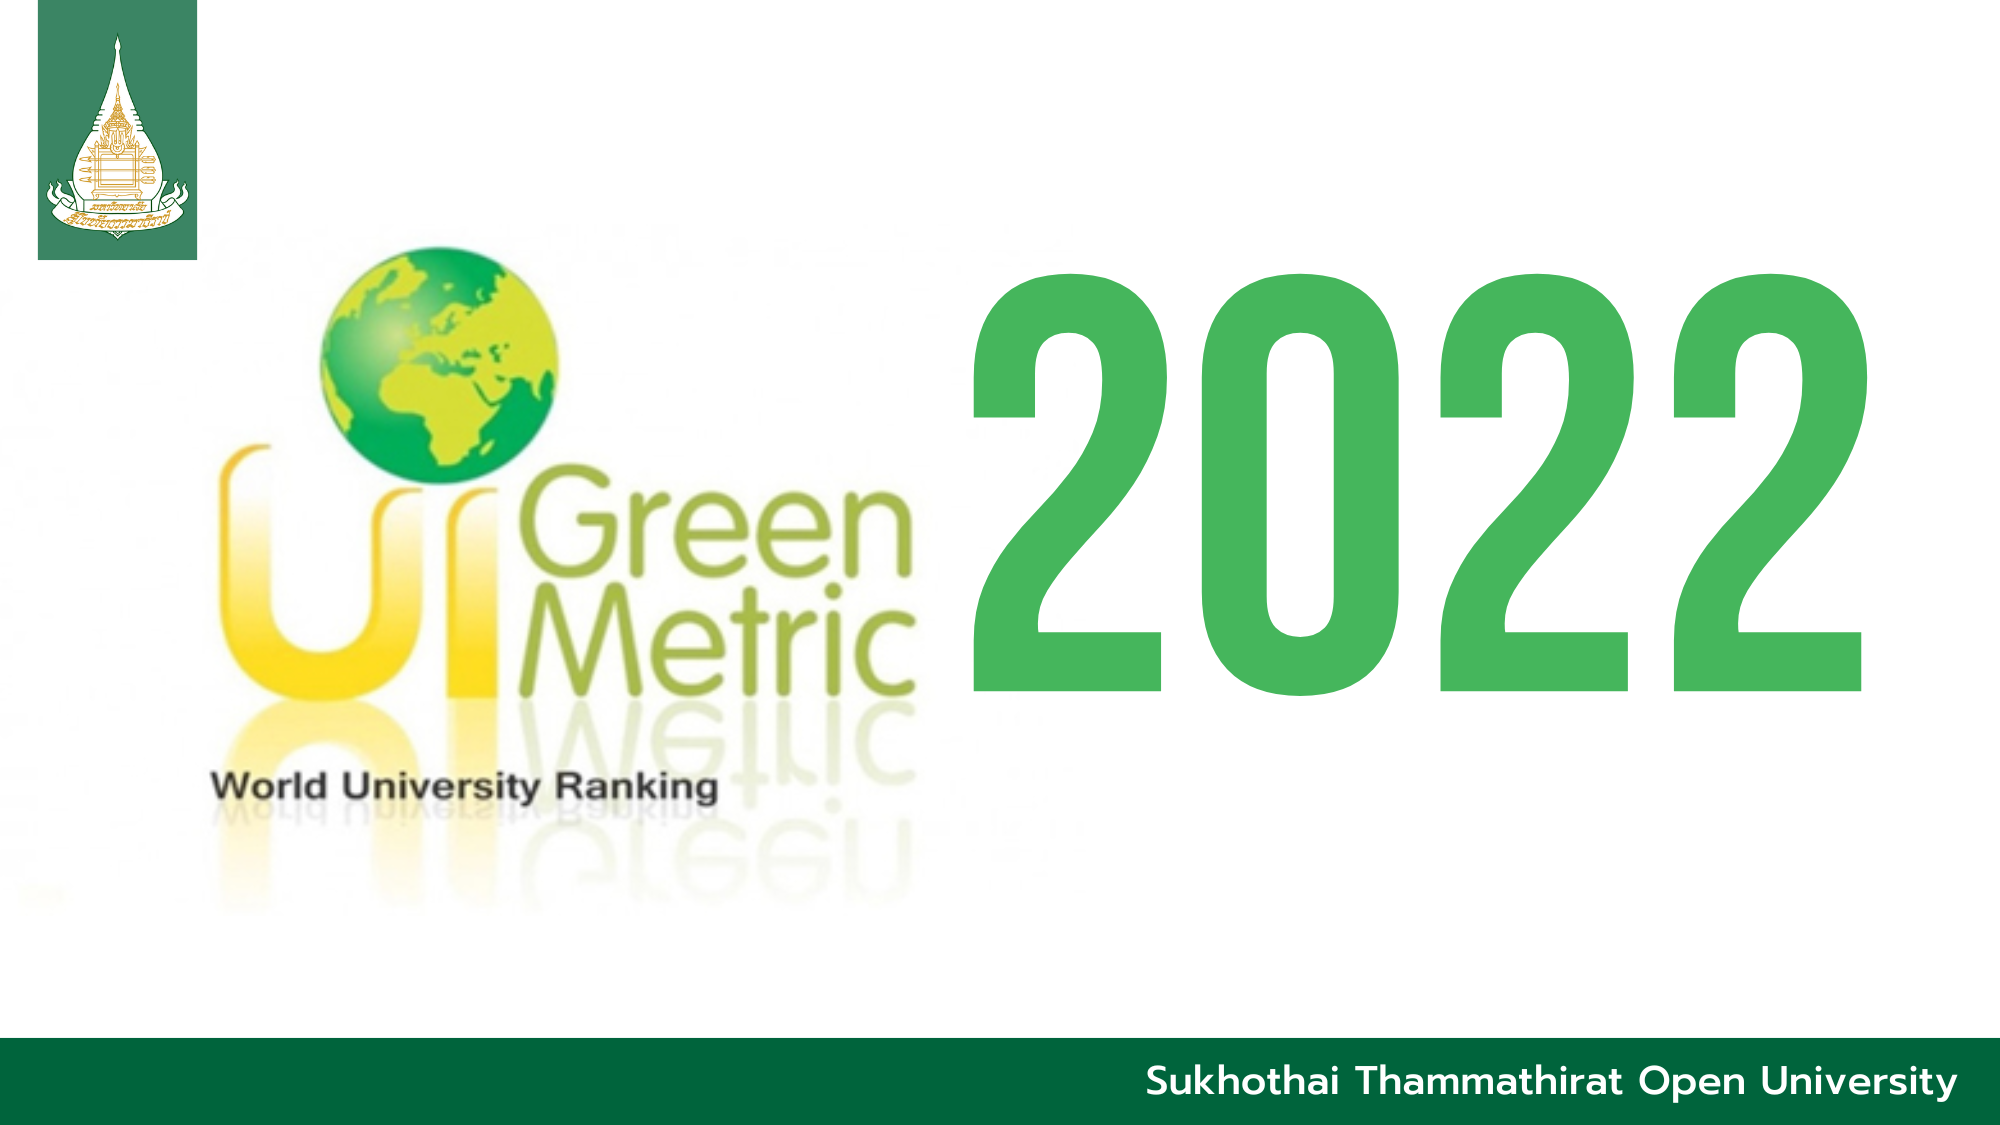 You are currently viewing 2022 UI GreenMetric World University Rankings